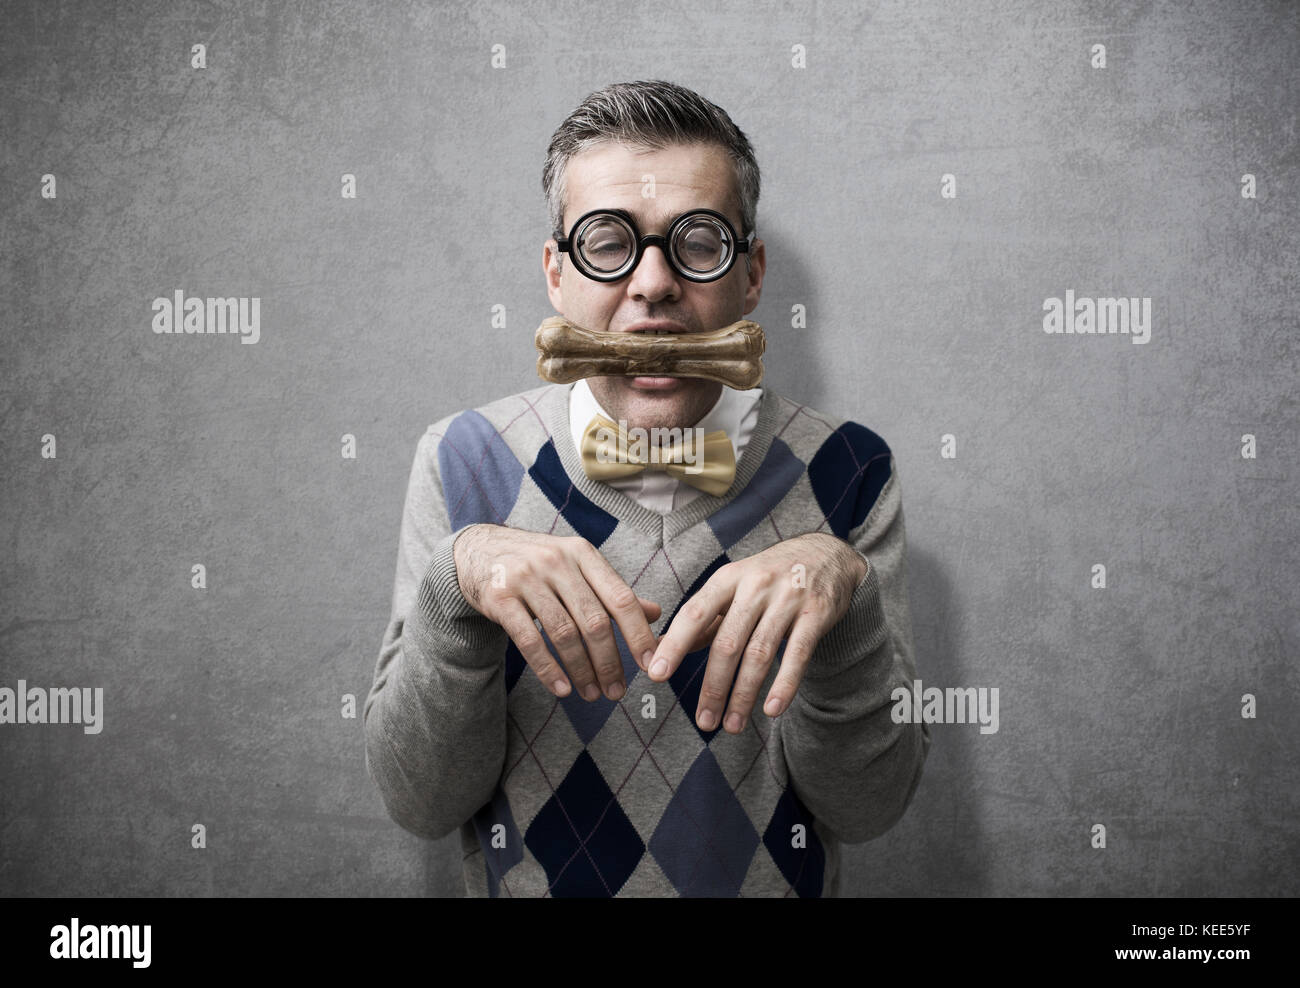 Submissive man acting like a dog and holding a bone in his mouth, obedience and humiliation concept Stock Photo